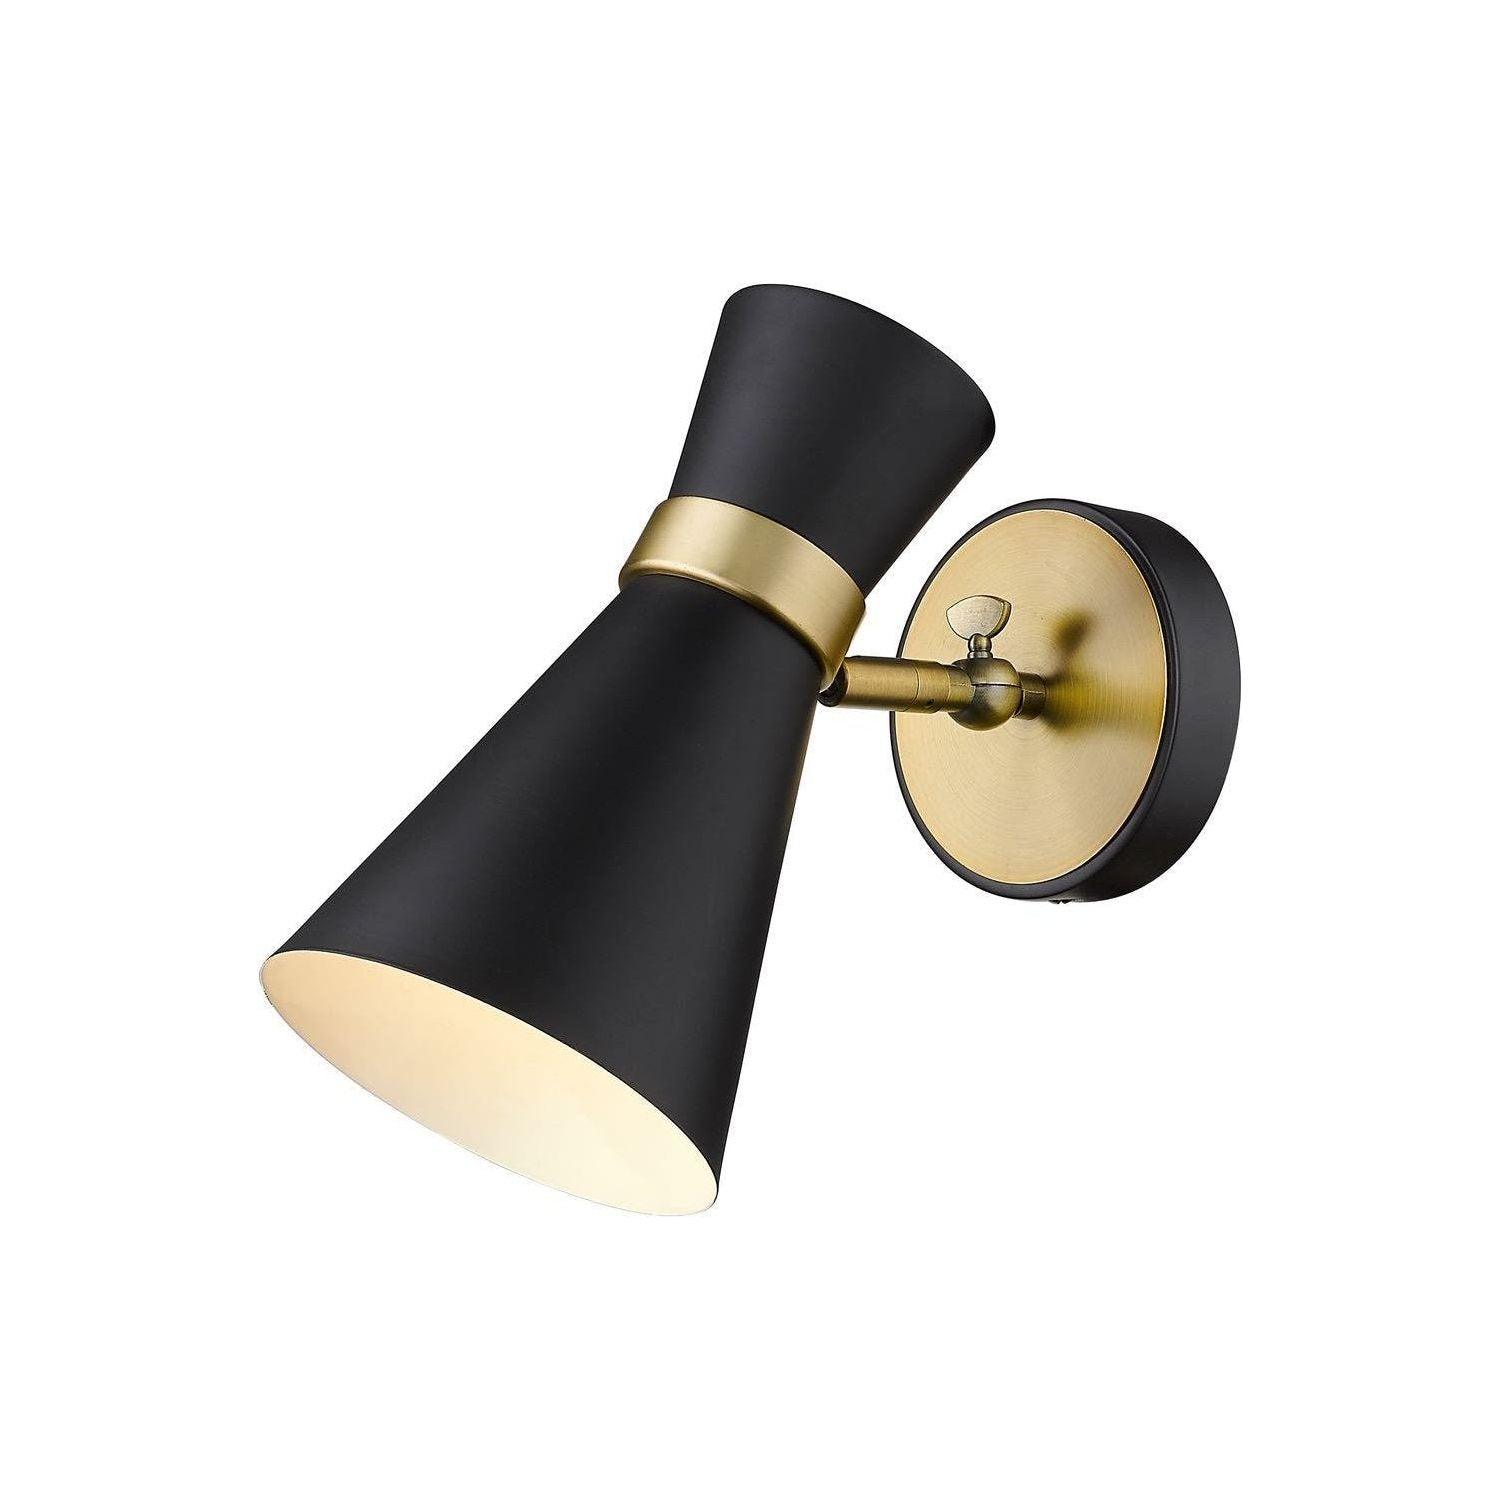 Z-Lite - Soriano Wall Sconce - Lights Canada